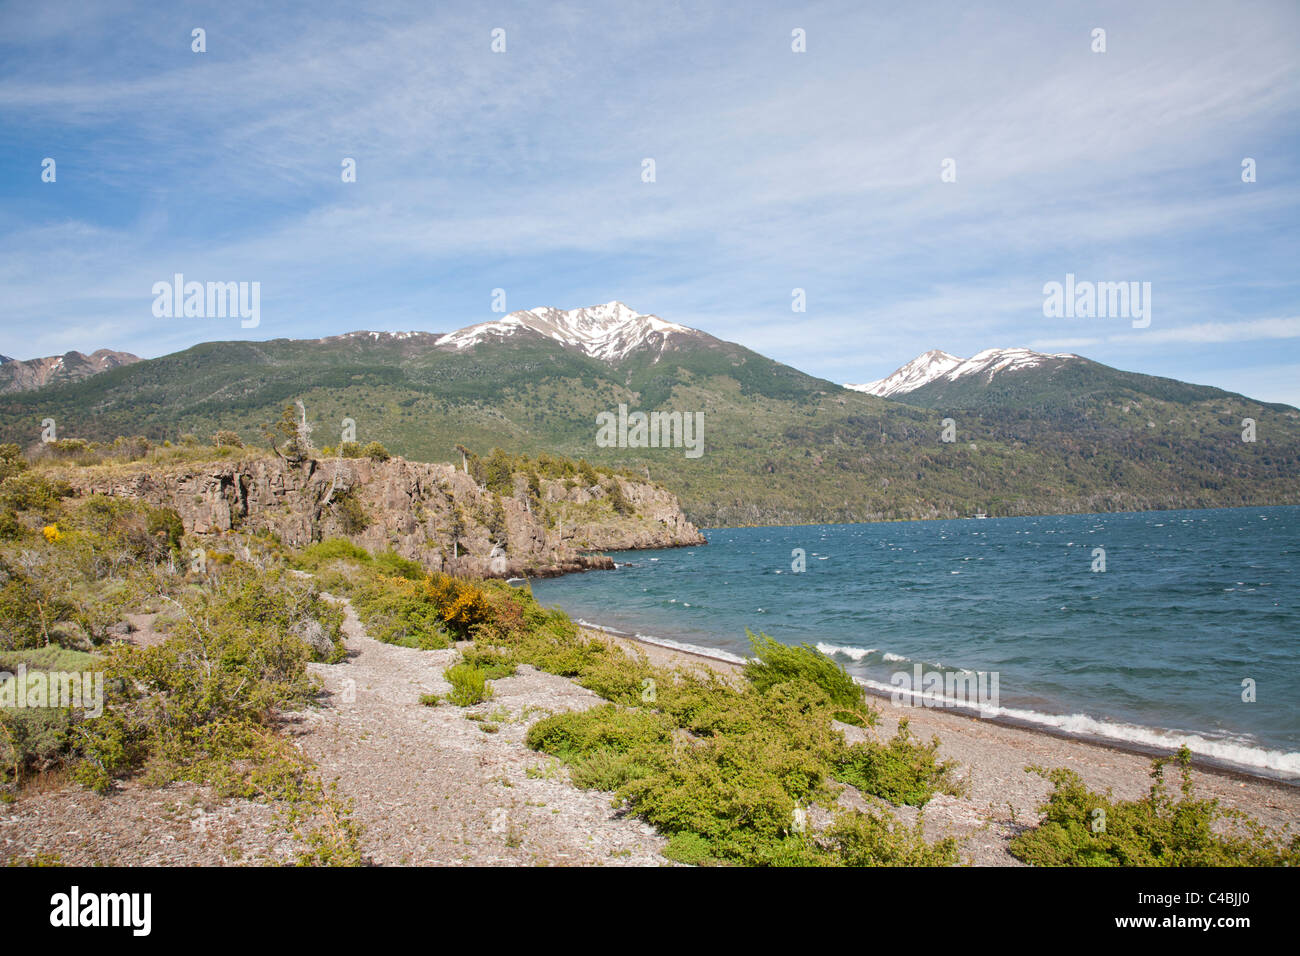 Lake Futalaufquen, one of the many lakes in the Los Alerces National Park. Stock Photo